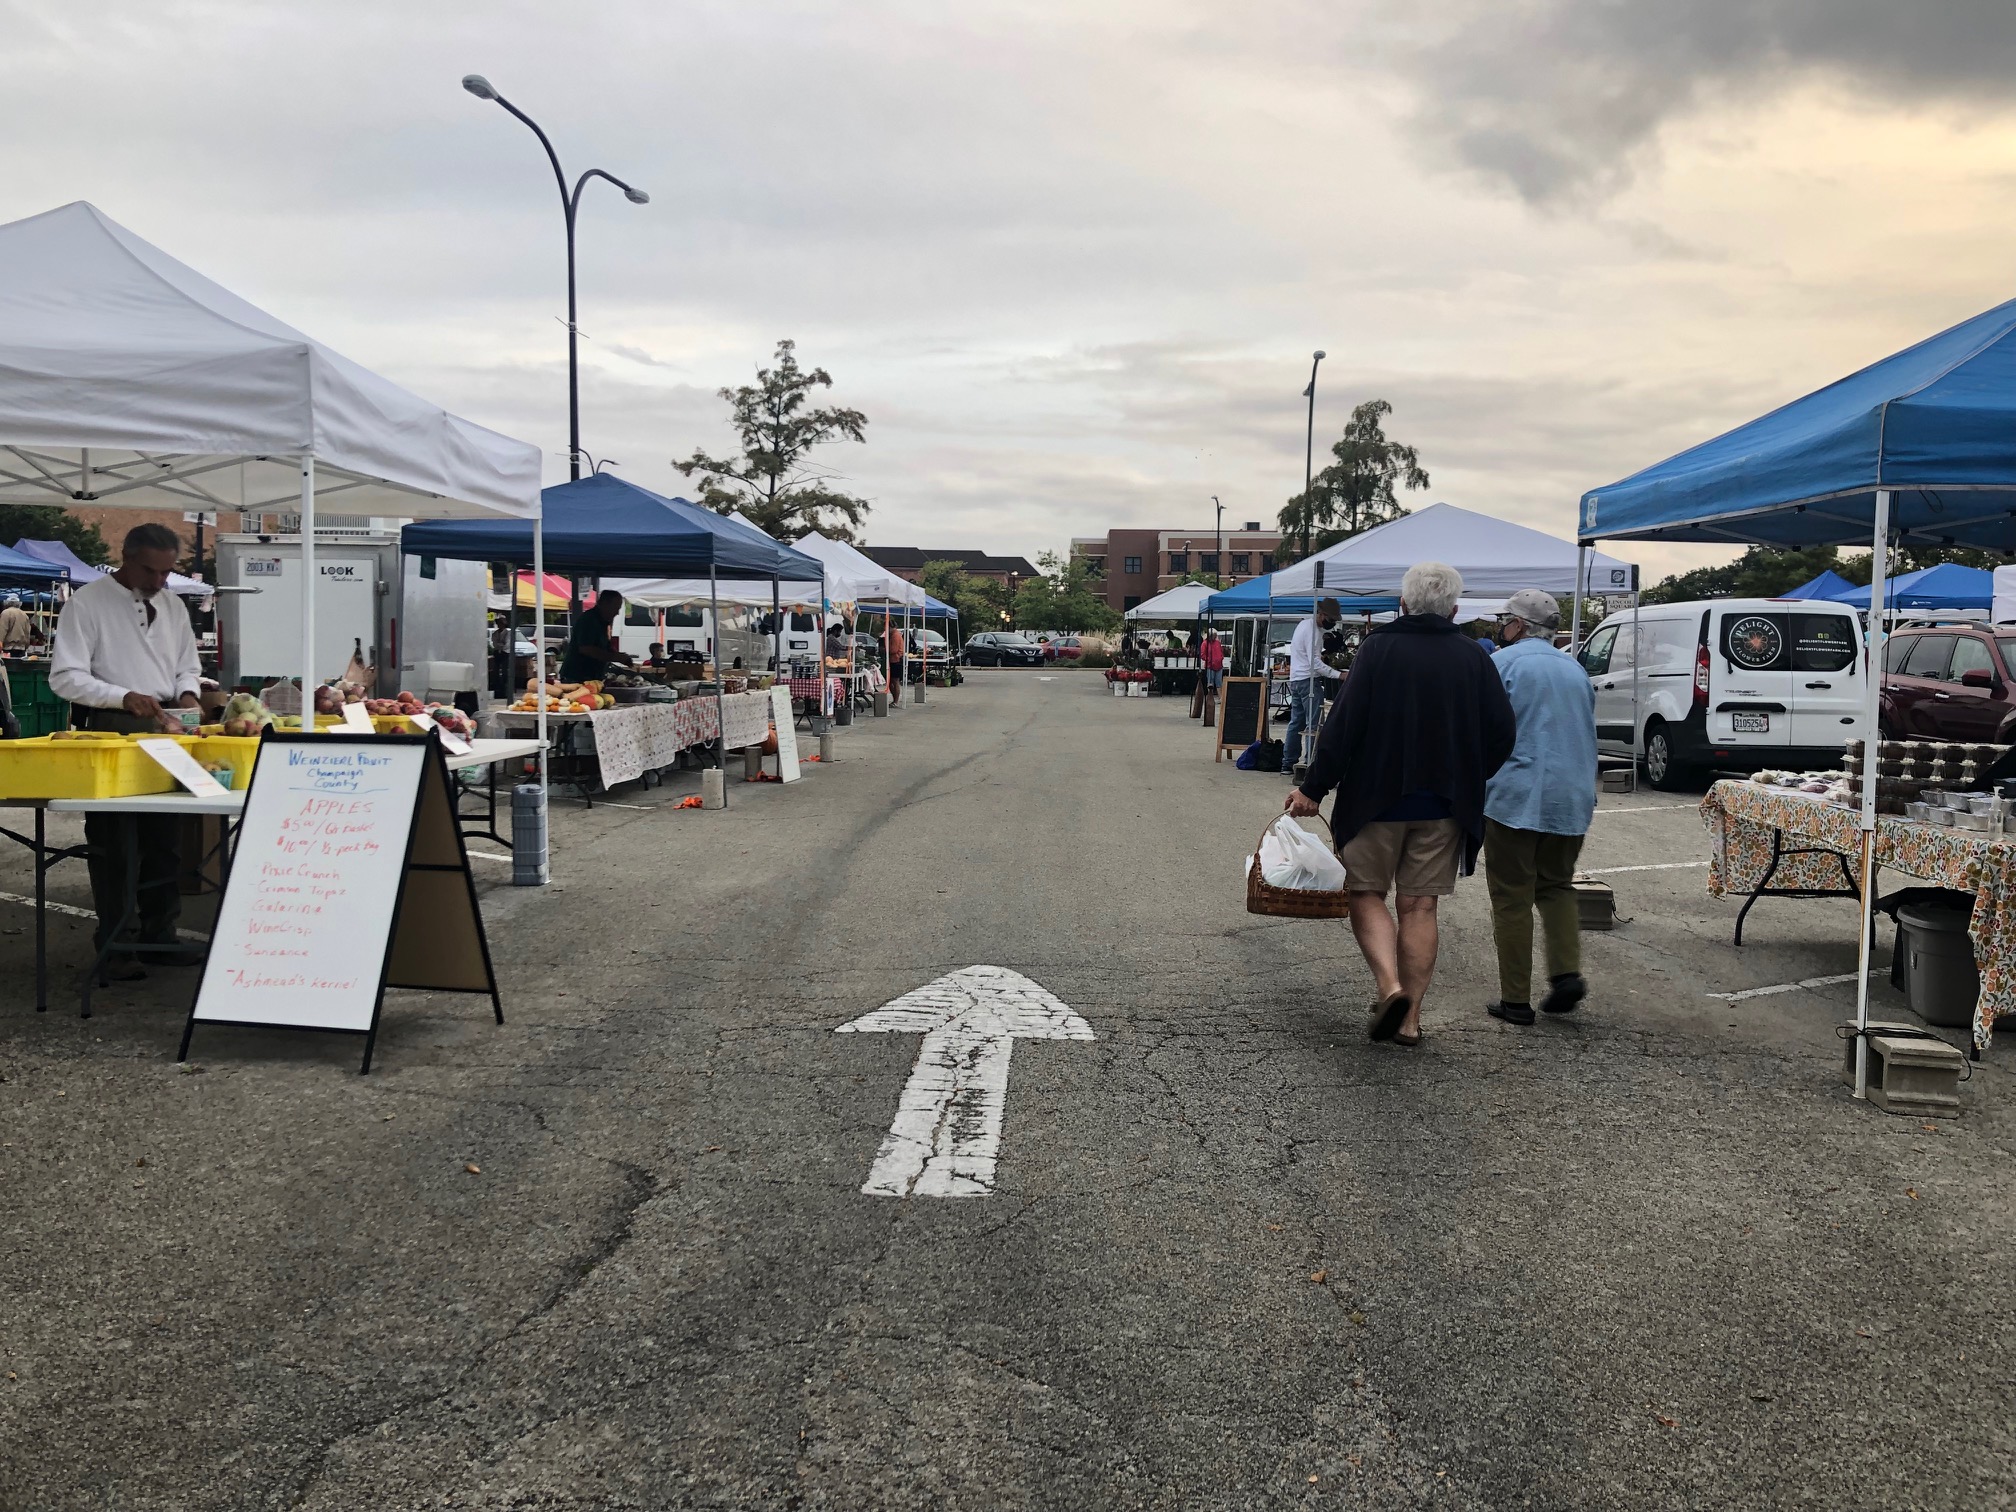 On a cloudy day, there are vendors under tents at the Urbana Market at the Square. The concrete has a weathered white arrow pointing away from the camera. Shoppers with bags face away. Photo by Alyssa Buckley.